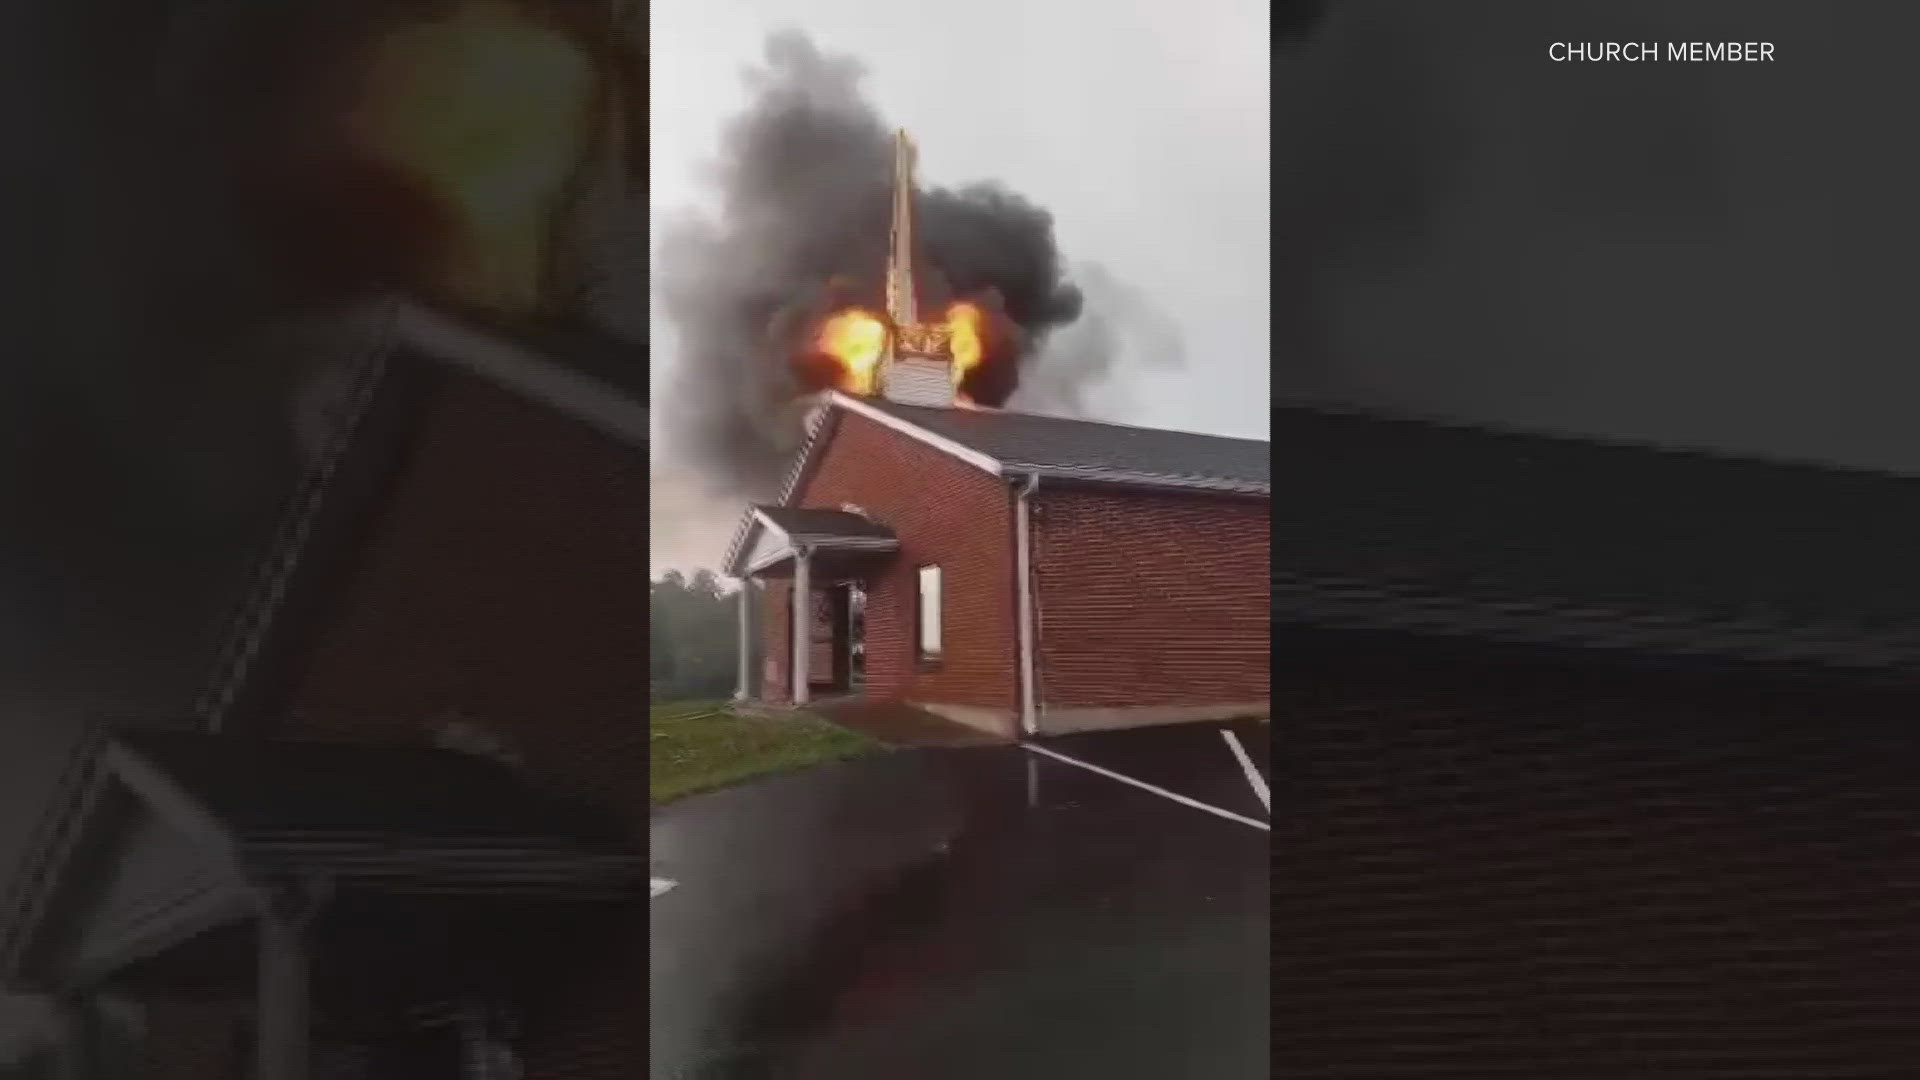 A Baptist church in Fairfield caught fire Thursday during a string of storms that hit Kentuckiana